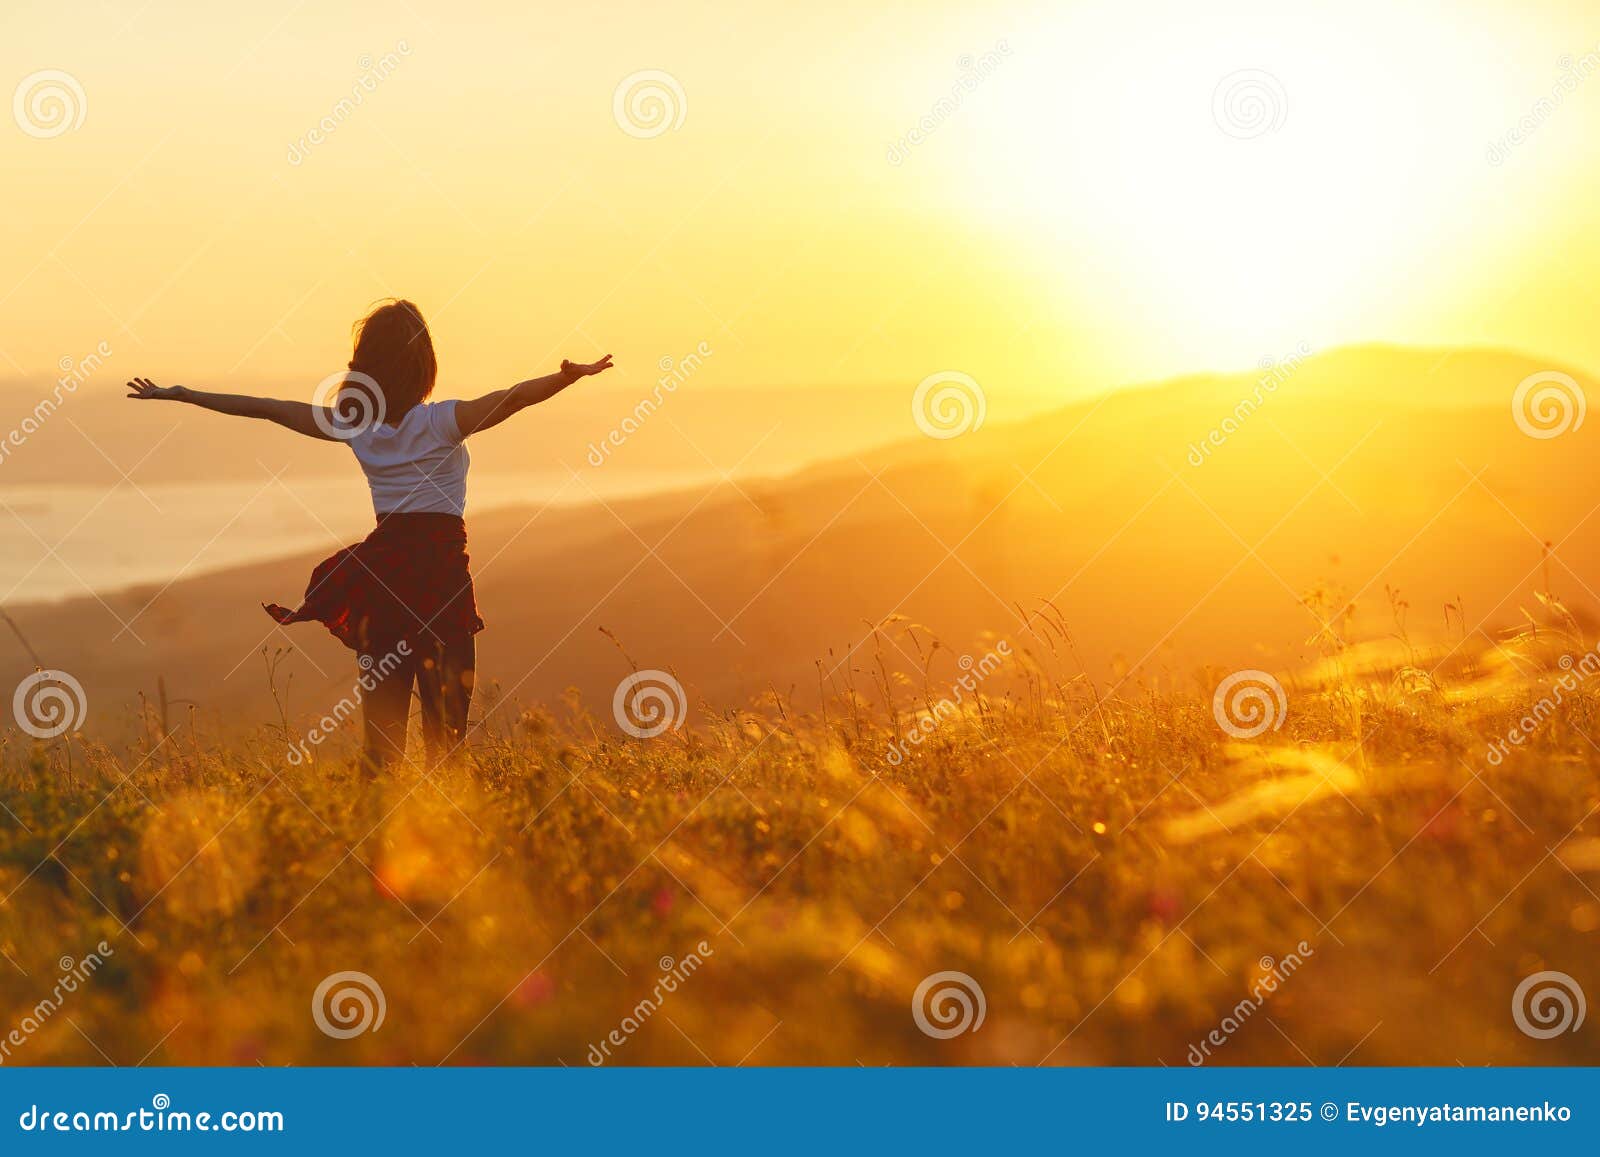 happy woman standing with her back on sunset in nature iwith ope